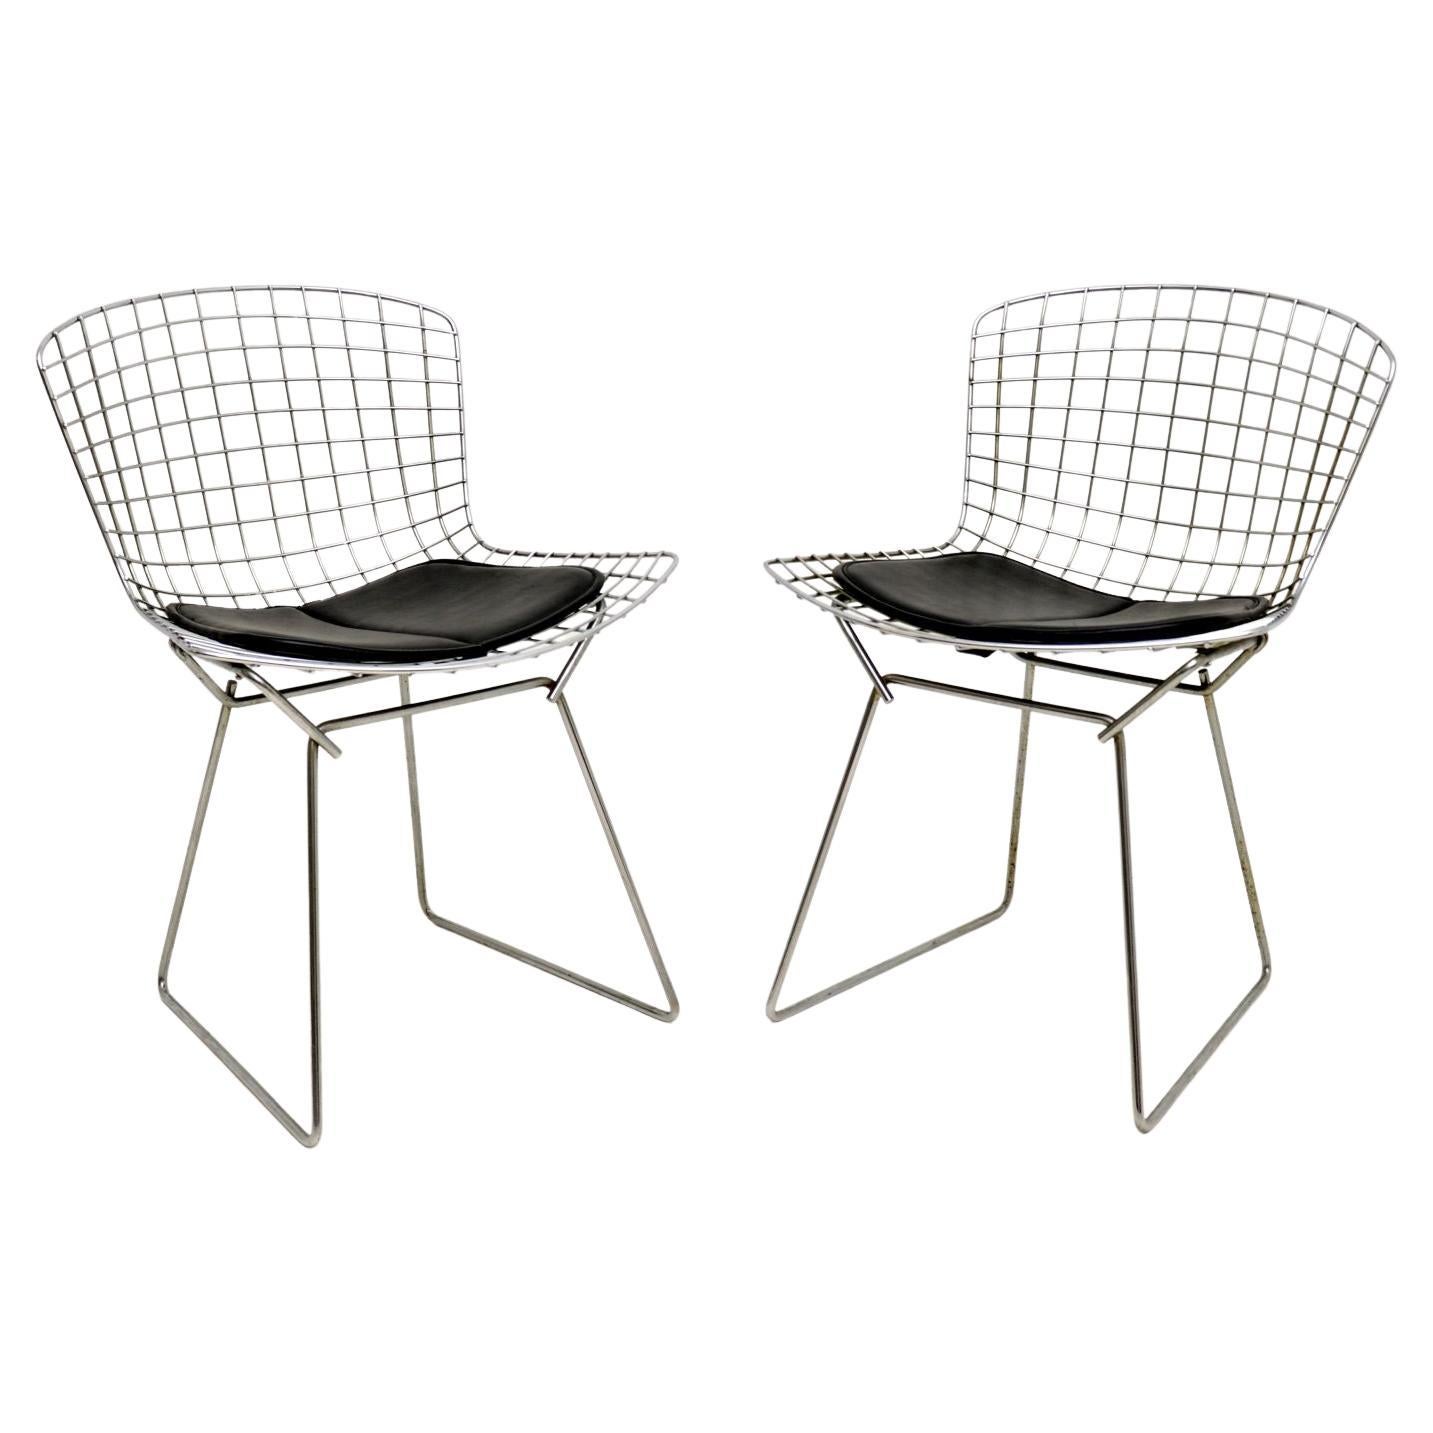 Pair of Vintage Wire Chairs by Harry Bertoia